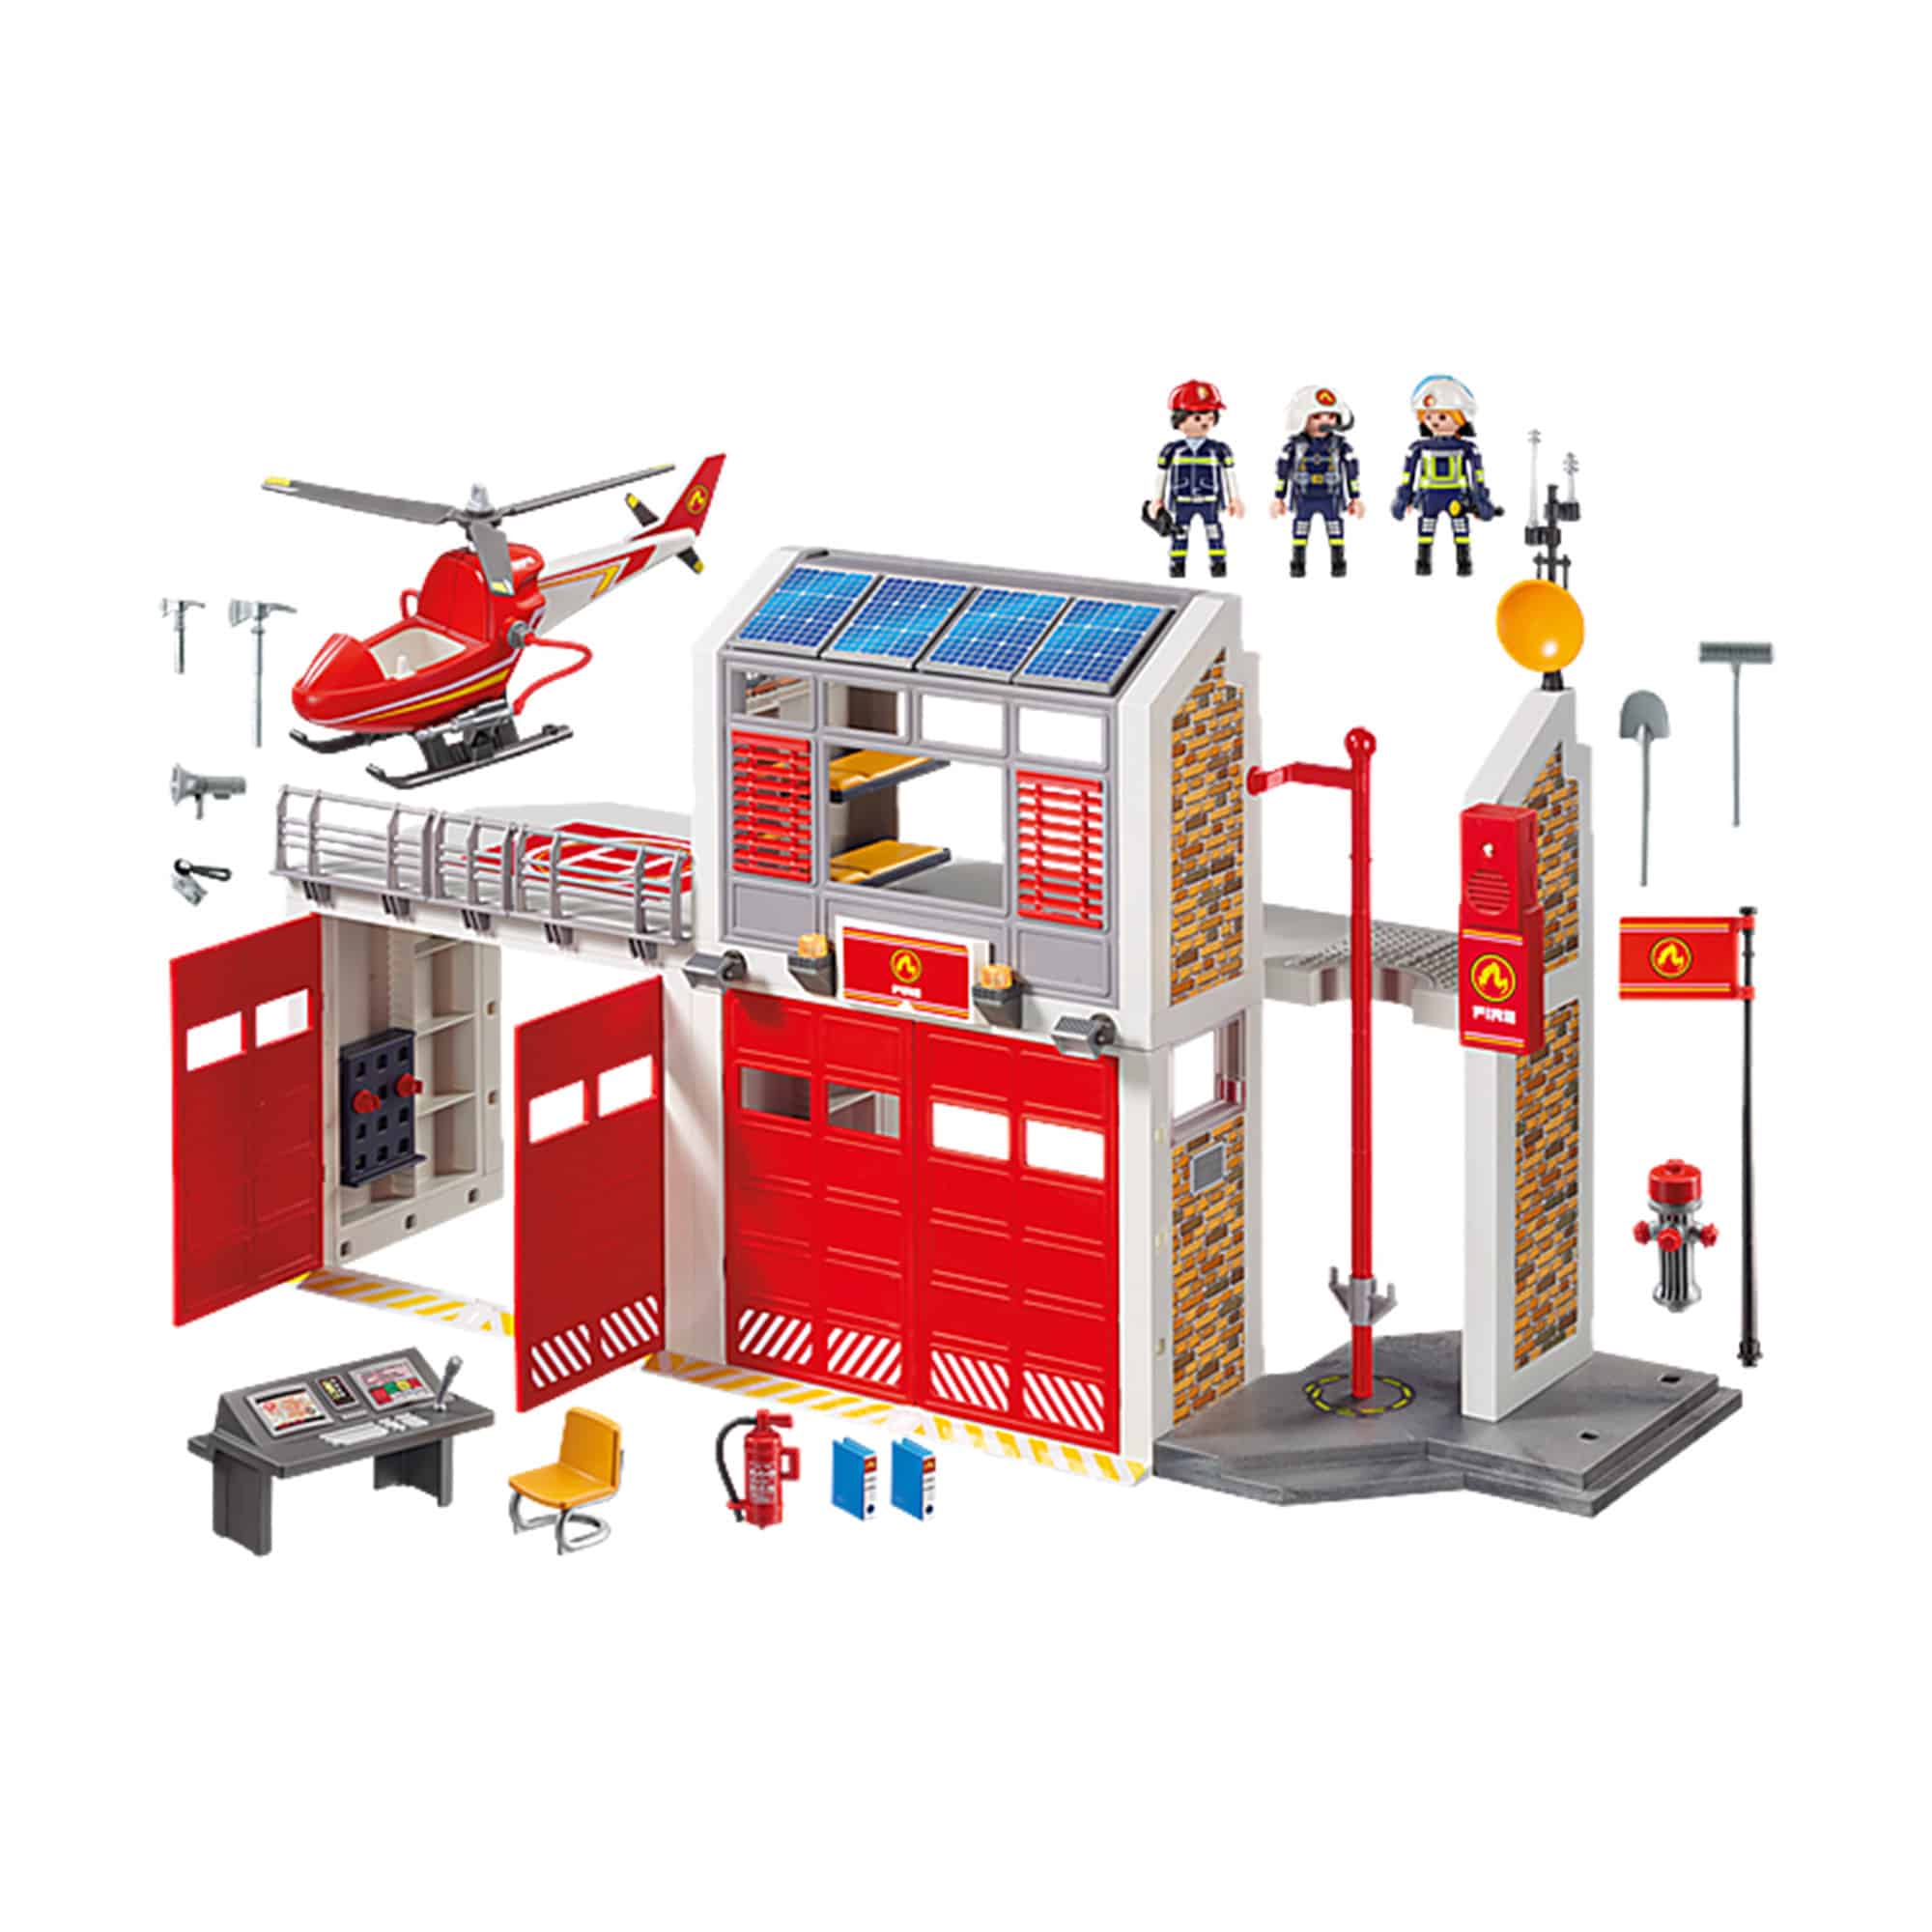 Playmobil - City Action - Fire Station 9462